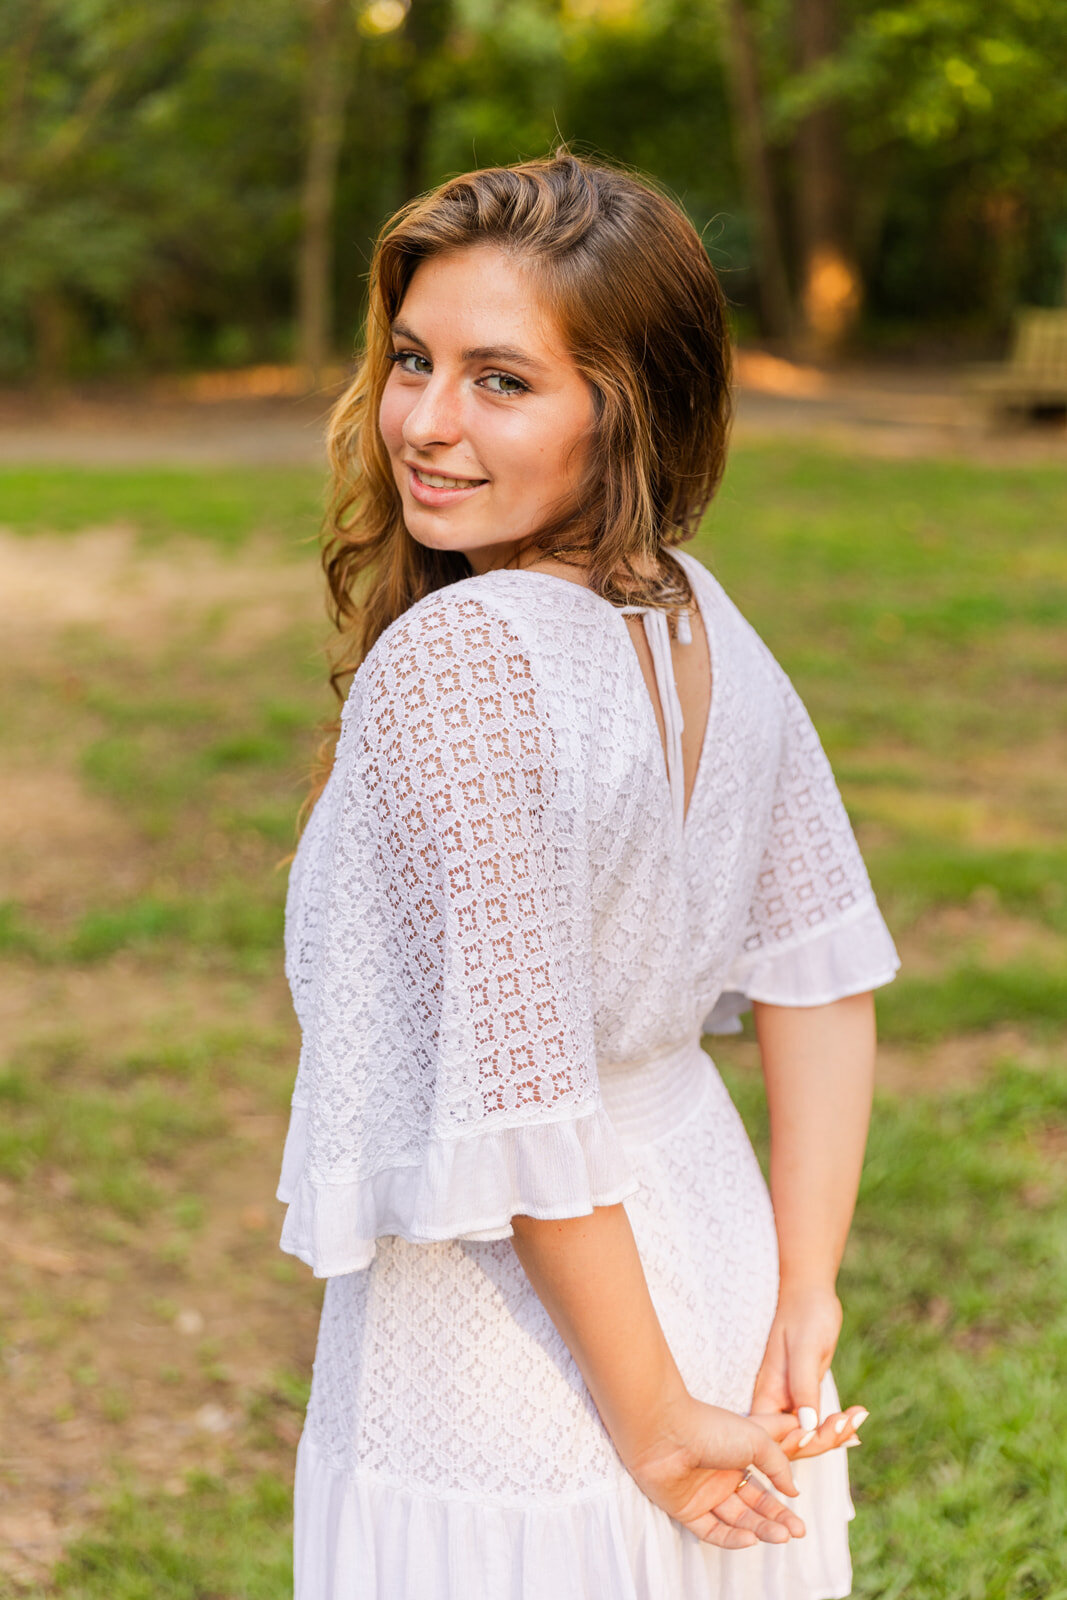 hgih school senior girl in white dress during Atlanta photoshoot in a park by Laure photography